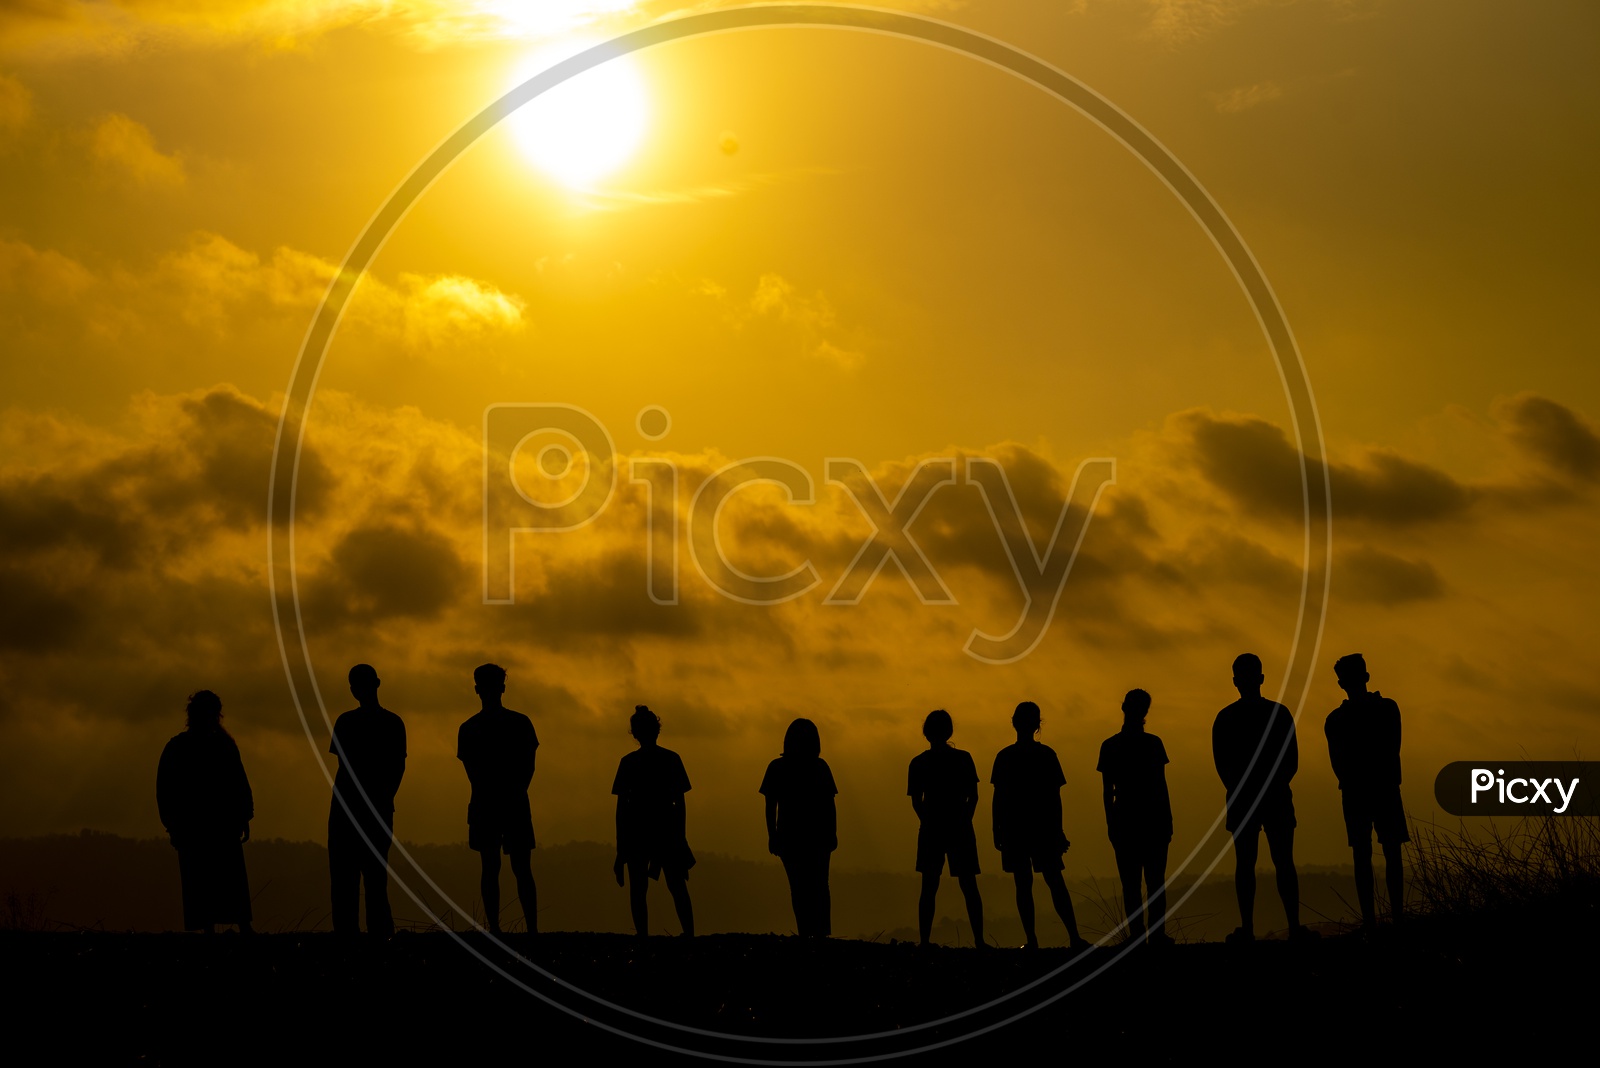 Group Of People Silhouette  on Hilltop Over Sunset Sky